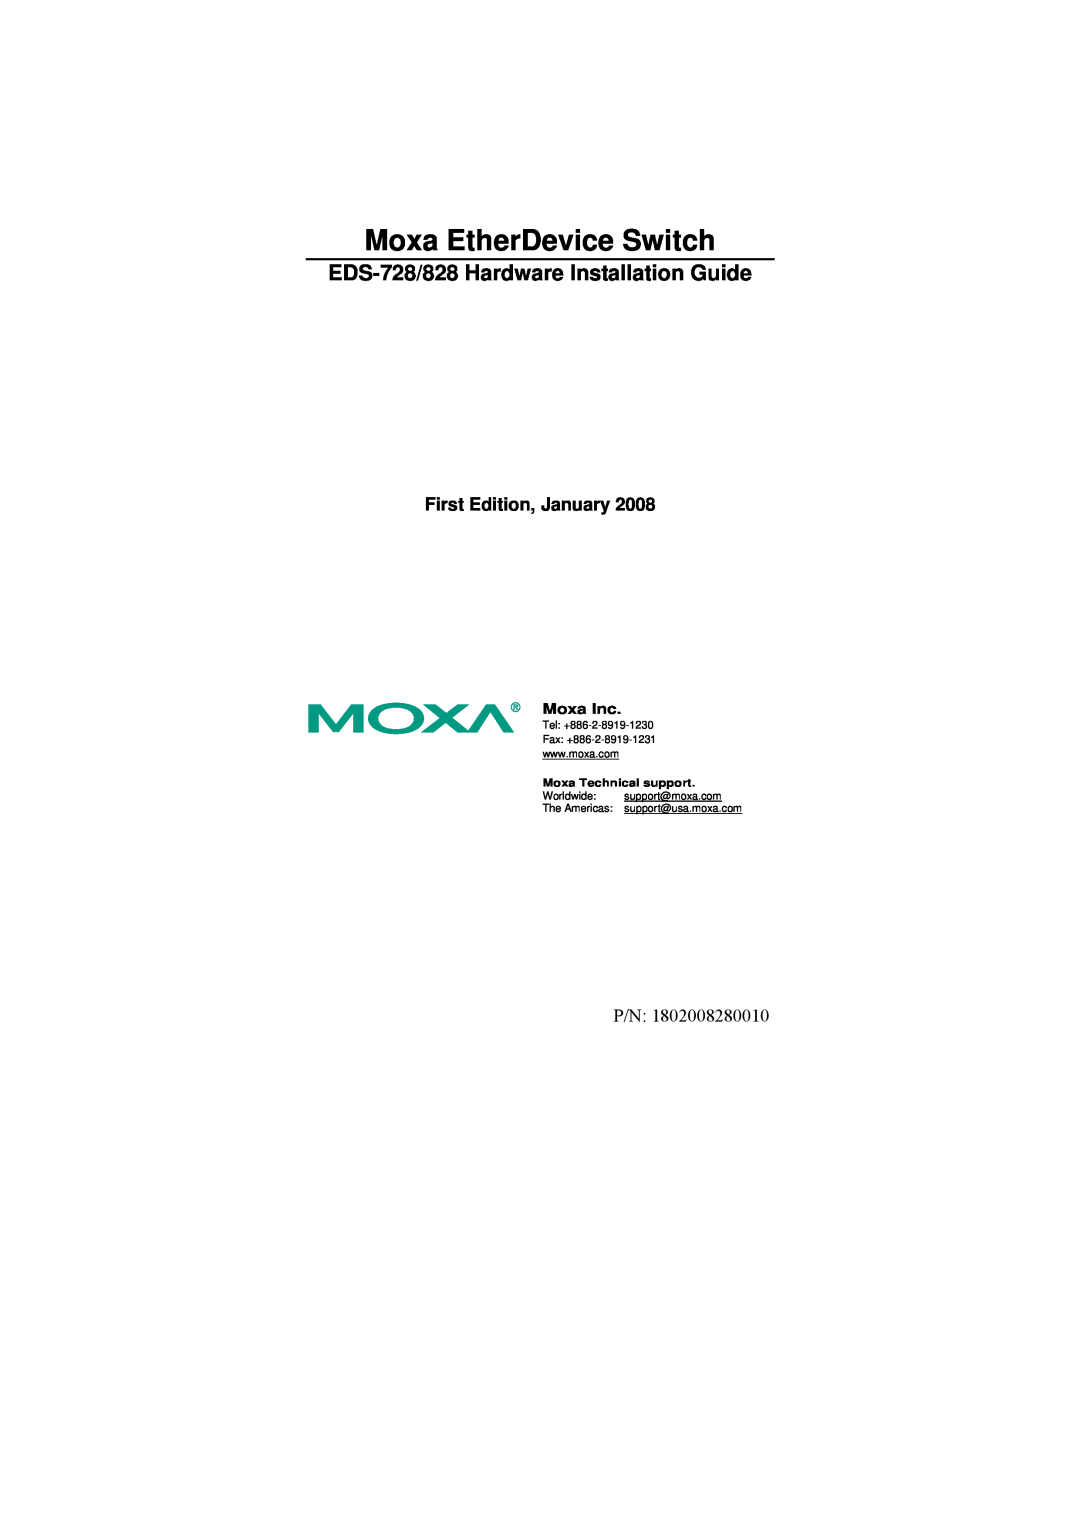 Moxa Technologies EDS-828 manual Moxa EtherDevice Switch, First Edition, January, EDS-728/828 Hardware Installation Guide 